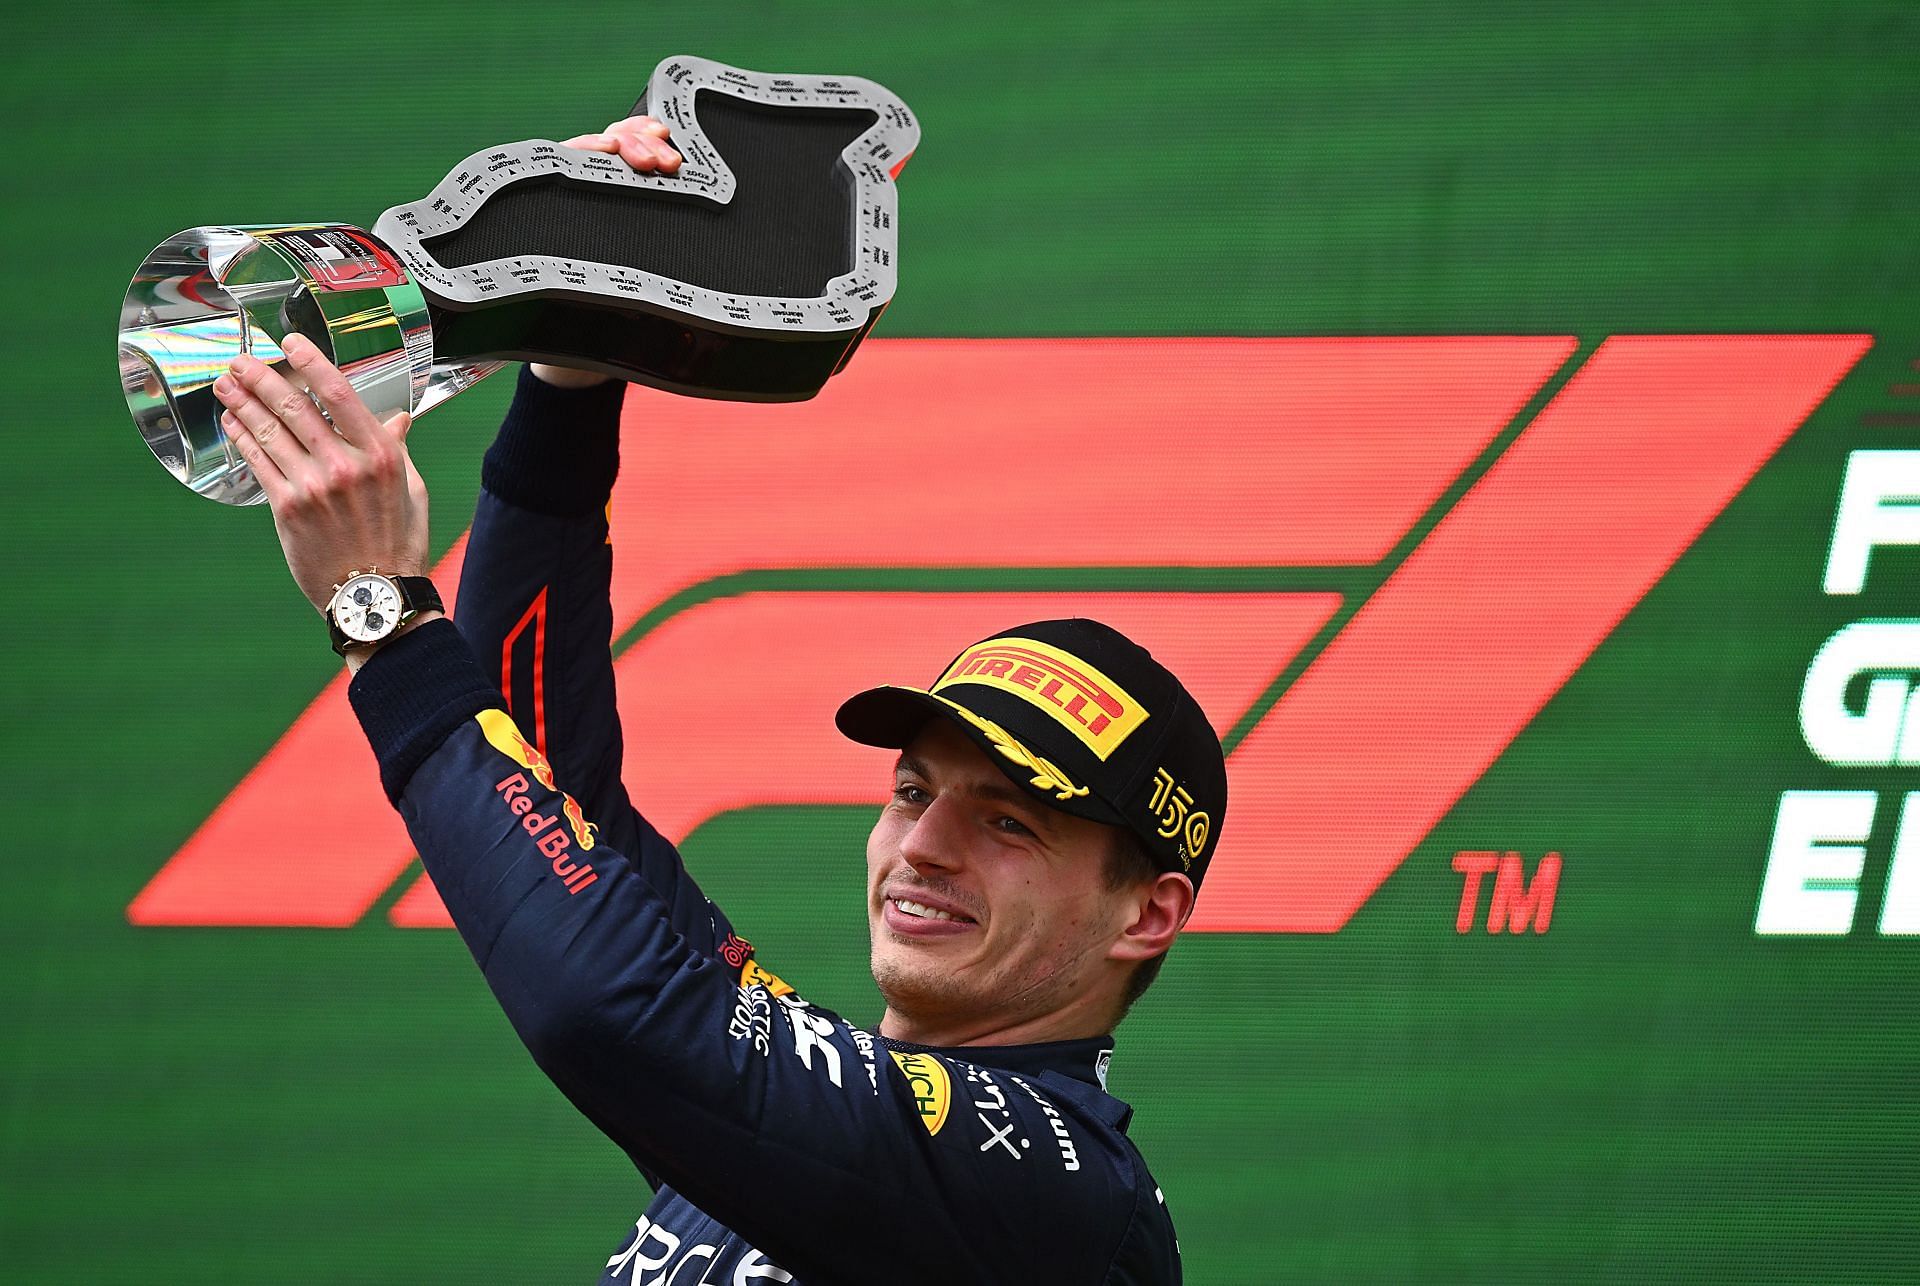 Max Verstappen celebrates his win on the podium at the 2022 F1 Imola GP (Photo by Clive Mason/Getty Images)